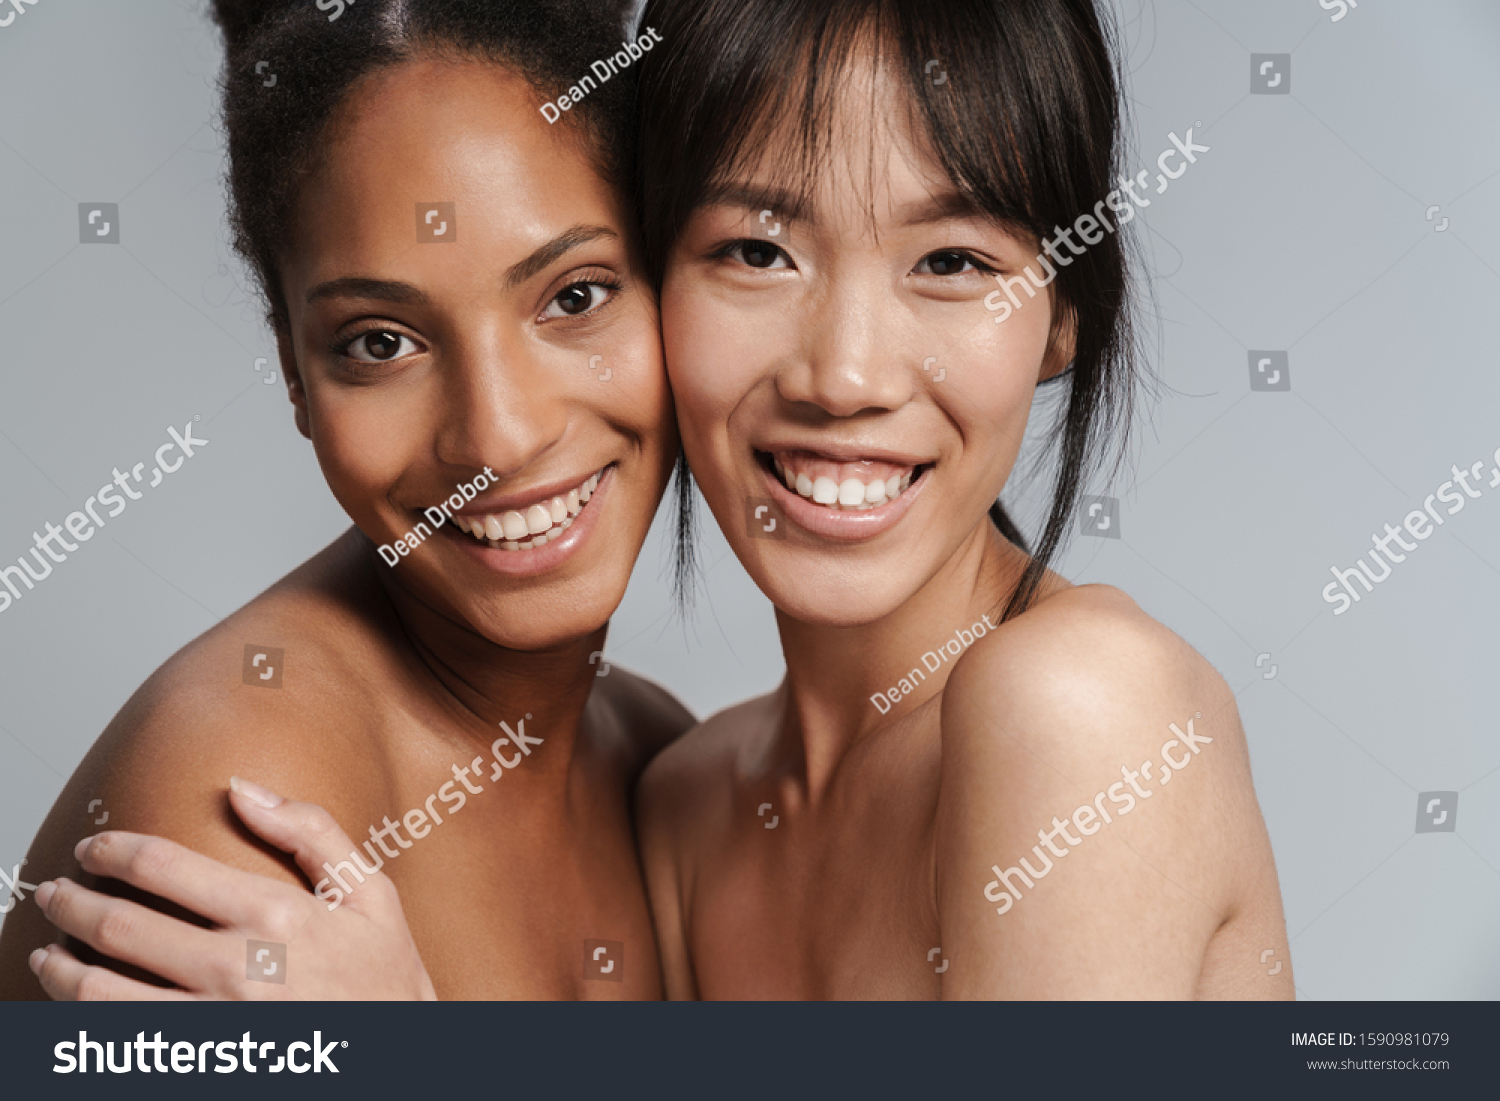 Portrait closeup of two multinational half-naked women hugging and laughing isolated over grey background #1590981079